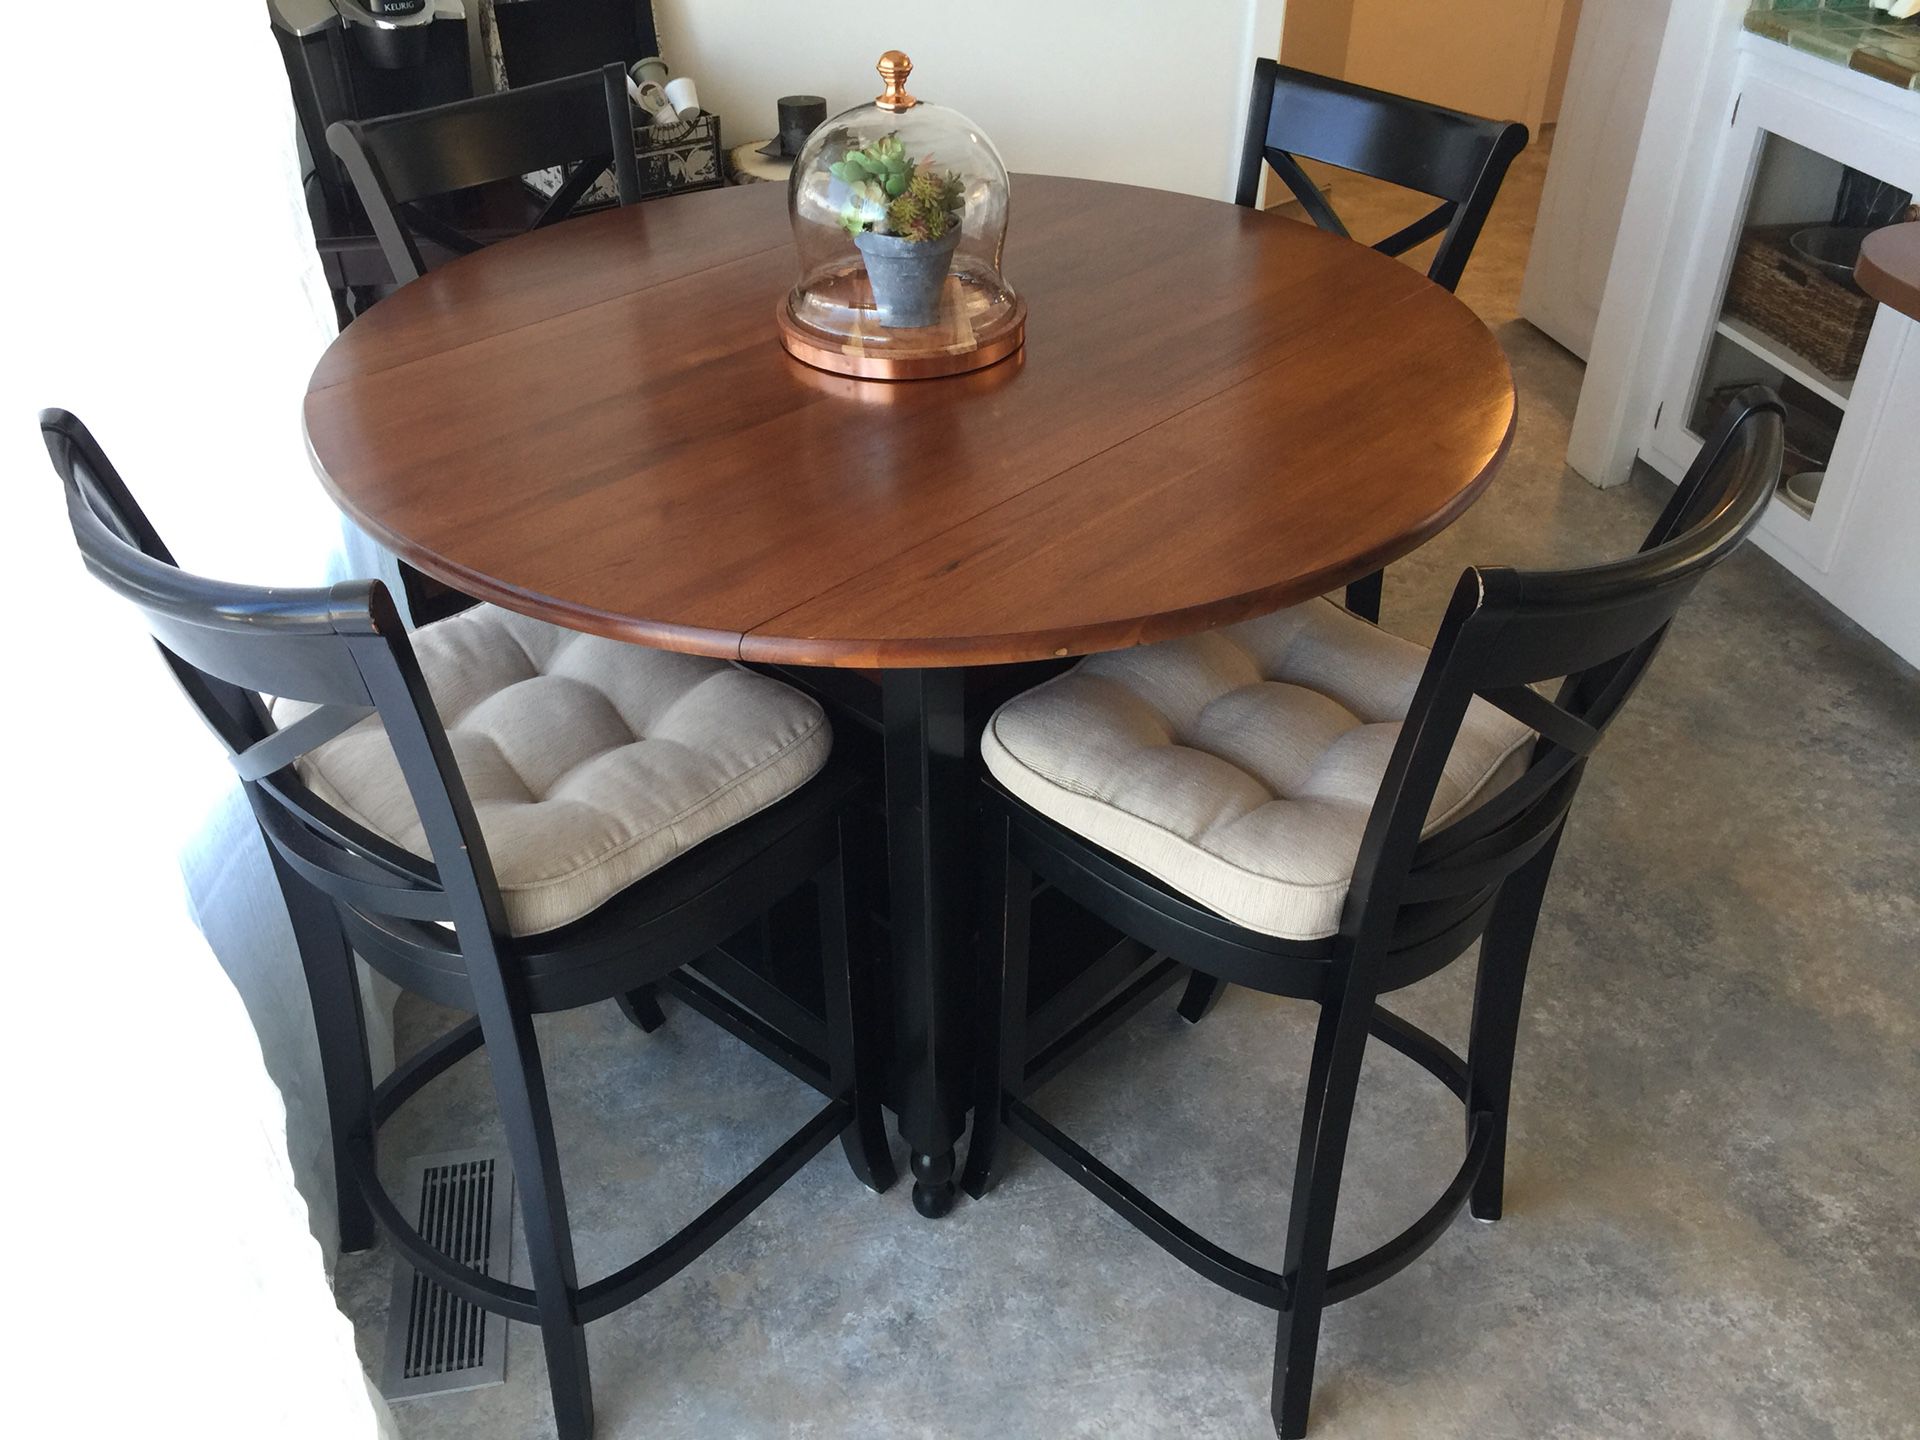 Kitchen table & 4 chairs